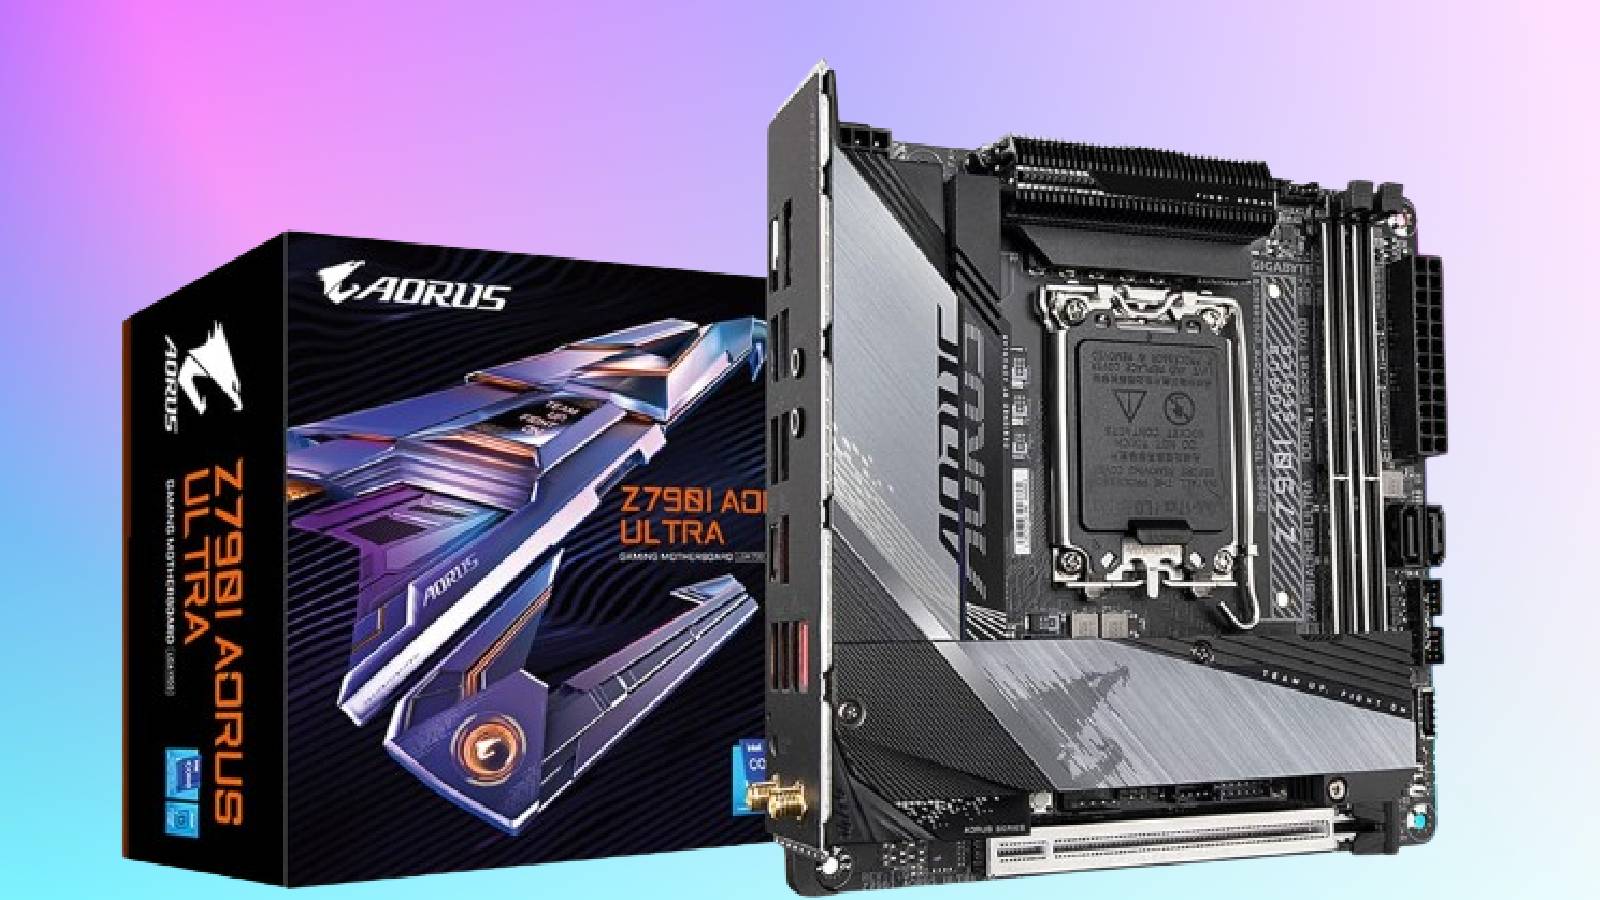 Gigabyte Z790 Aorus motherboard with box